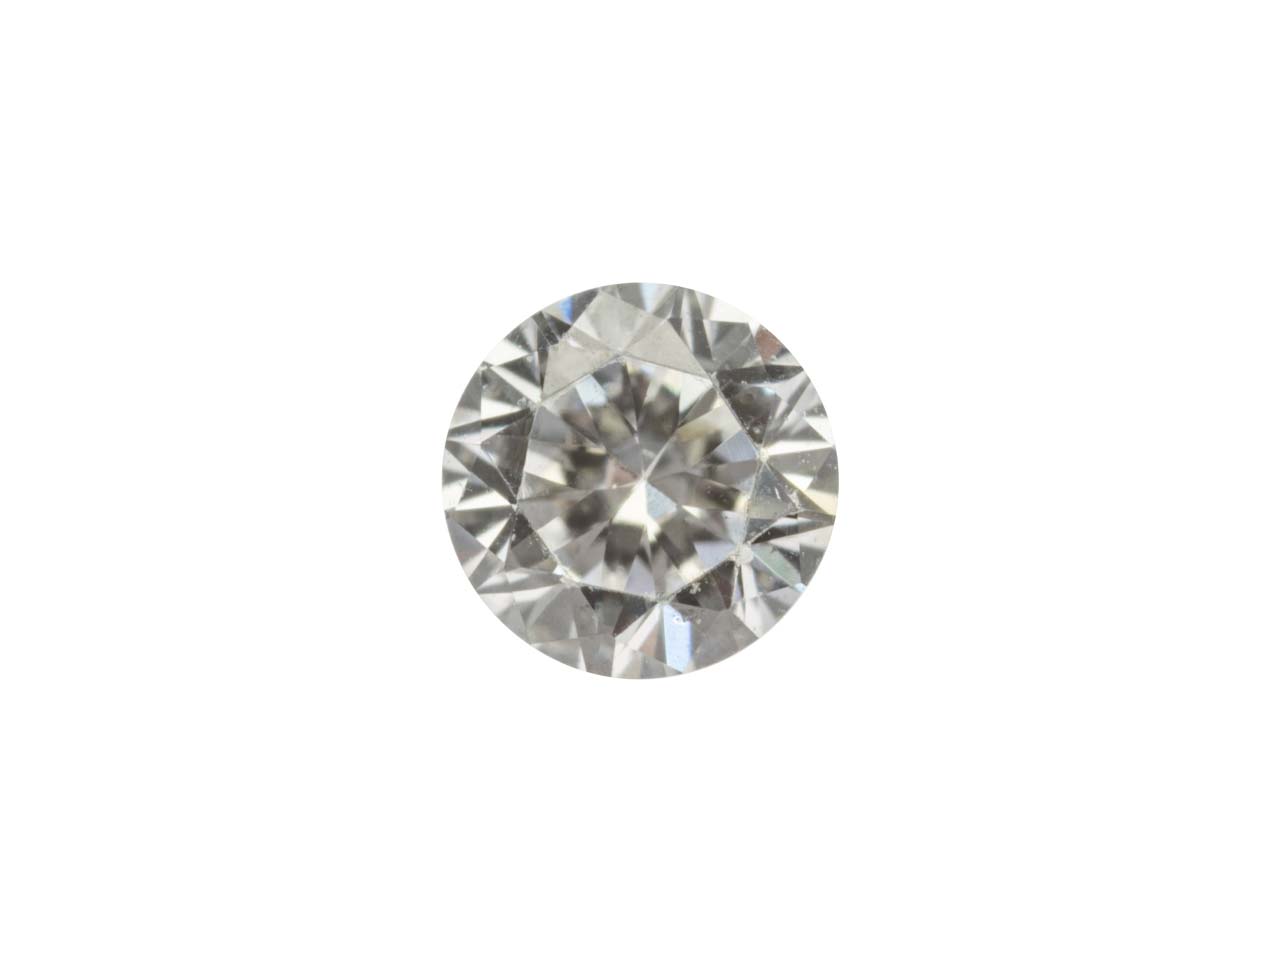 Diamond, Lab Grown, Round, D/VS, 1.2mm Questions & Answers